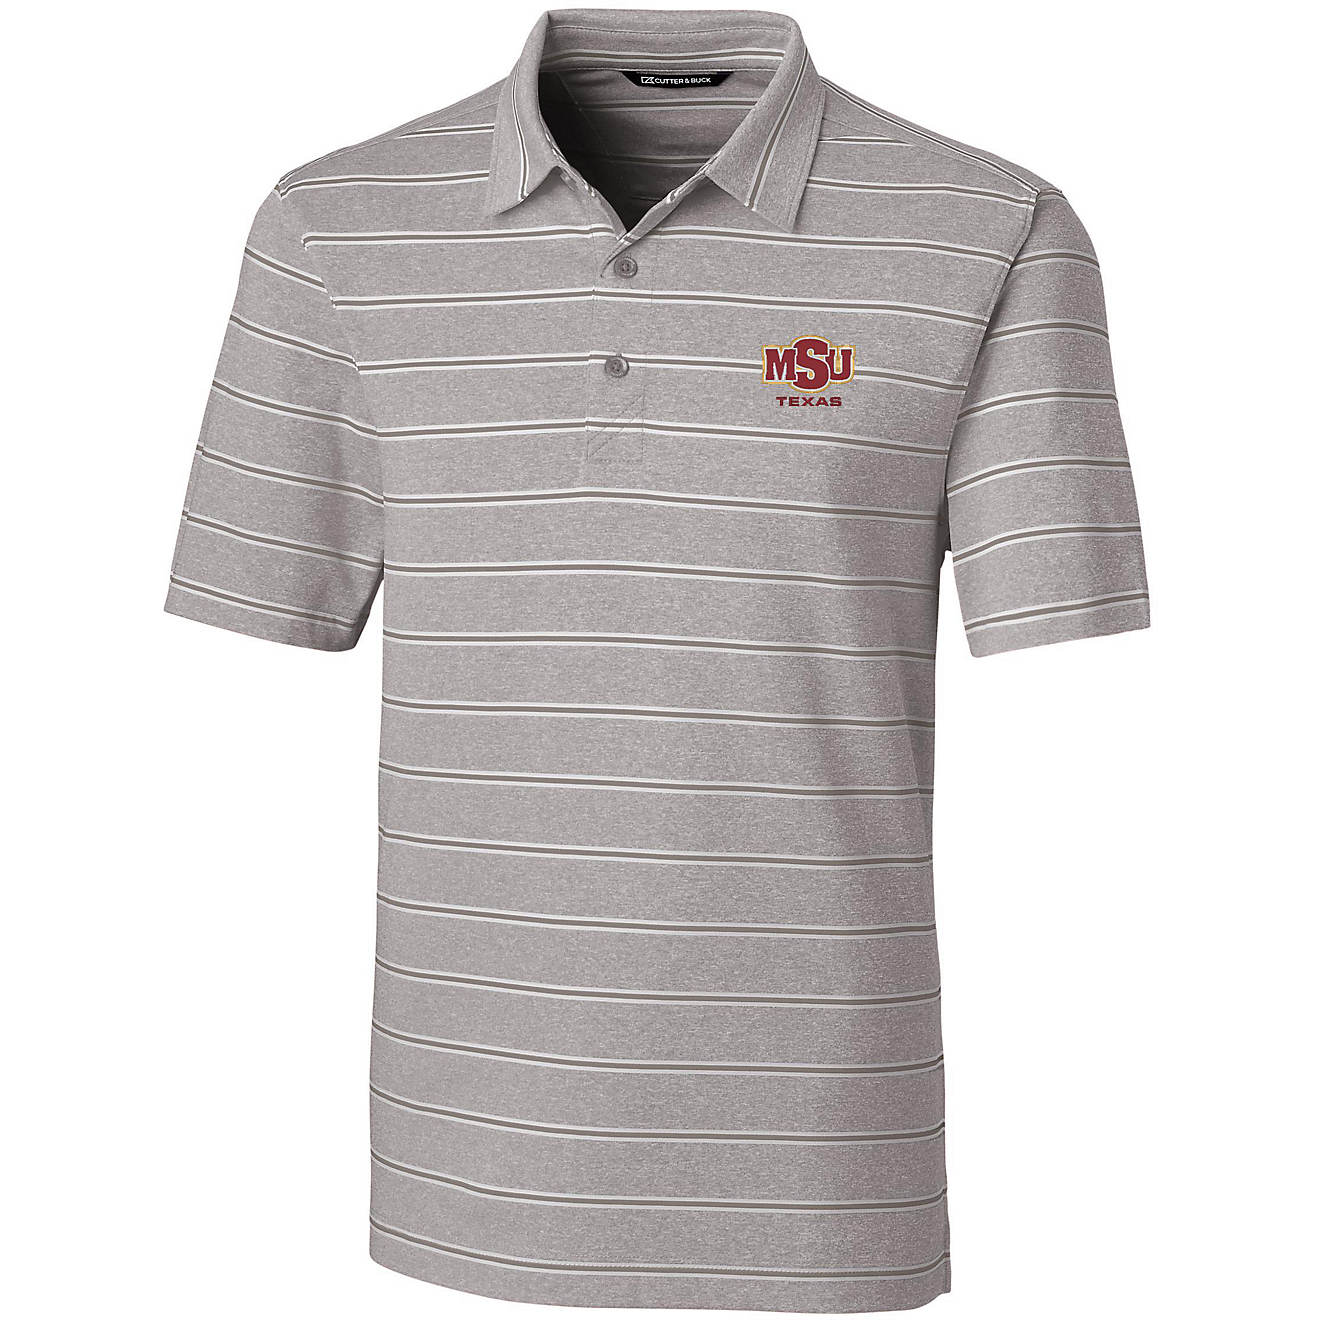 Cutter & Buck Men's Midwestern State University Forge Heather Stripe Polo                                                        - view number 1